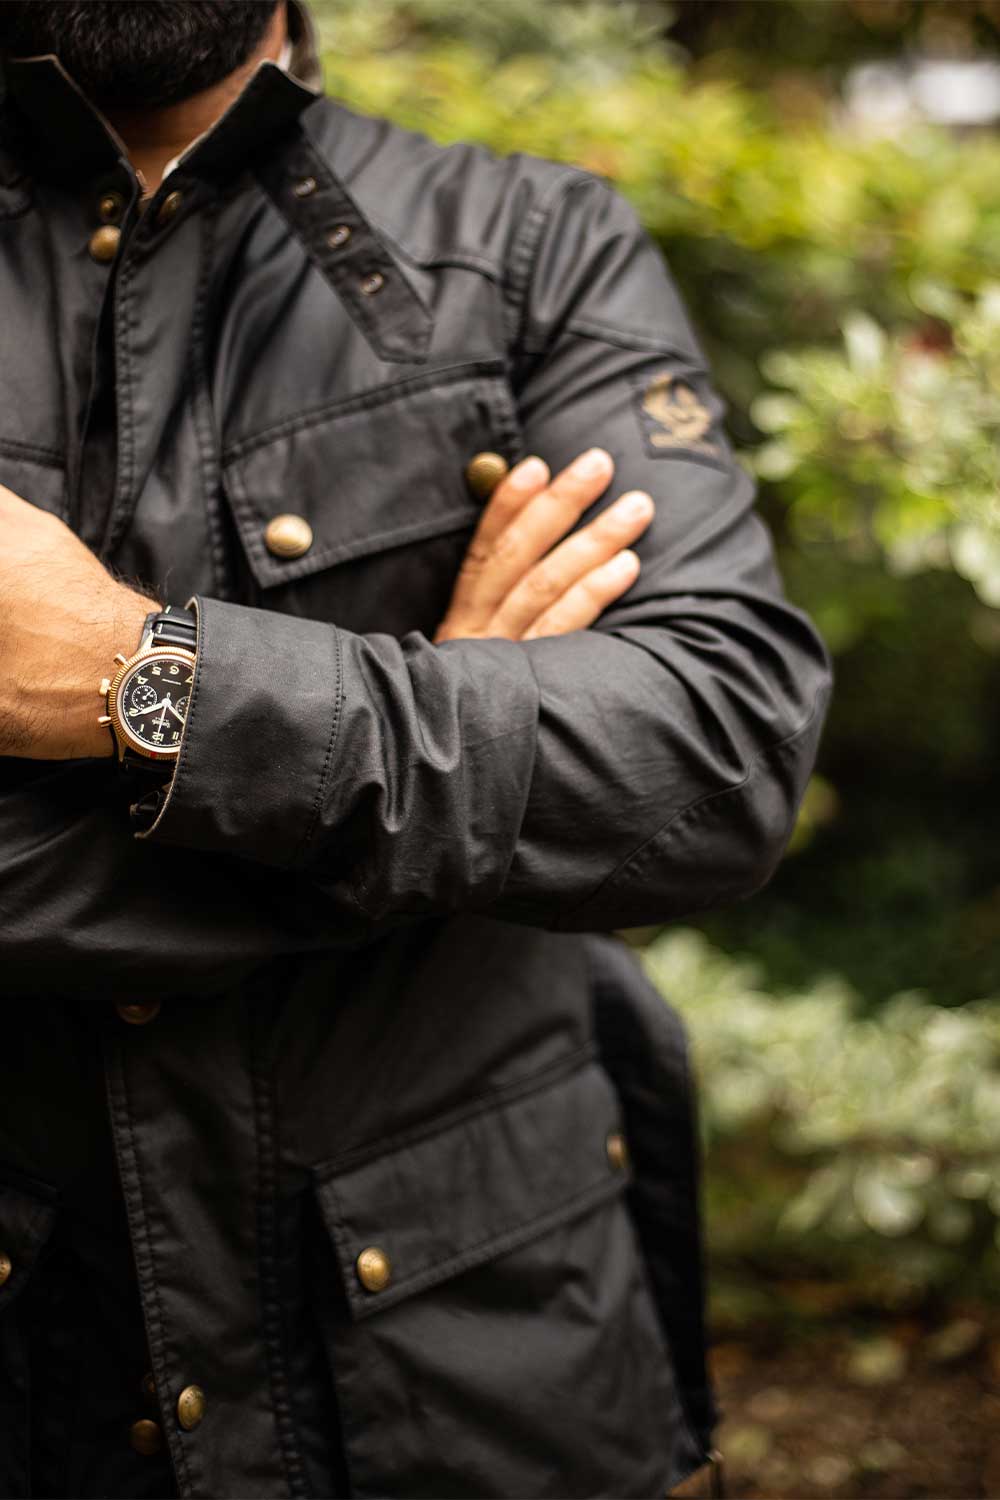 The Hanhart x The Rake & Revolution Limited Edition Bronze 417 Chronograph seen here paired with our exclusive faded vintage black Belstaff jacket completed by its brass snaps and zipper (©Revolution)